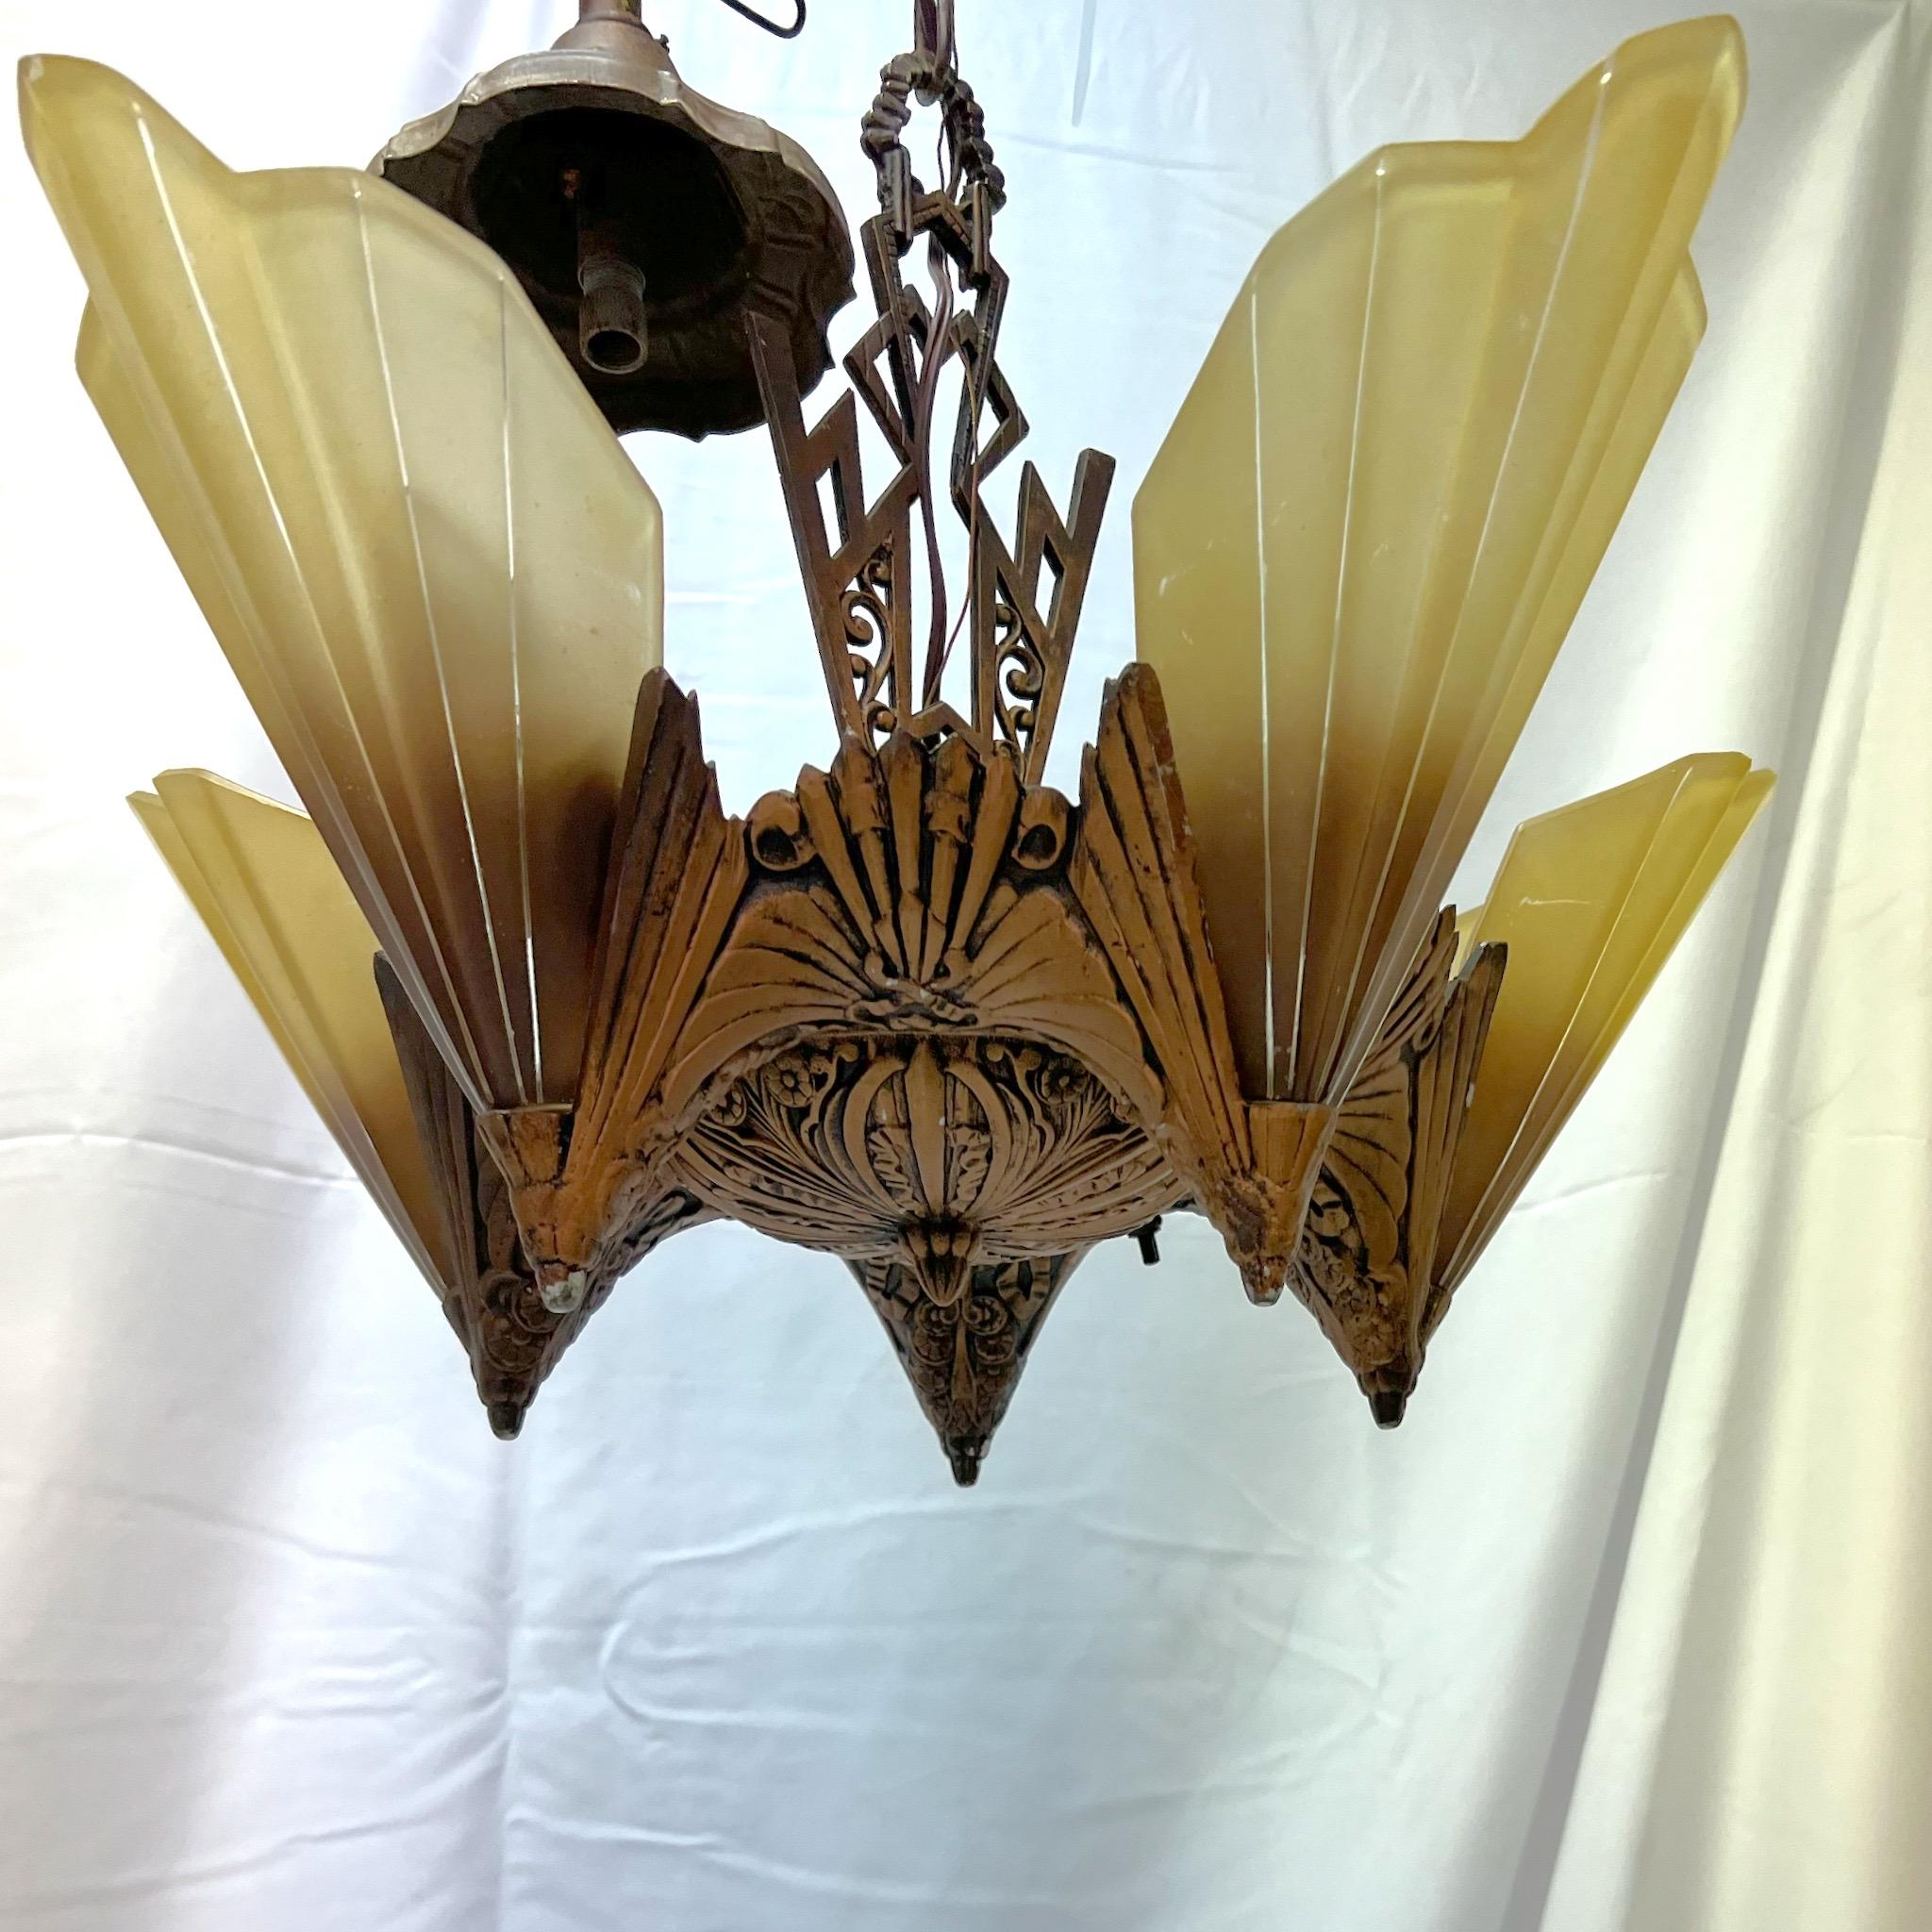 A pair of stunning antique Art Deco five-light slip shade chandeliers dating from the 1930’s, and made by Midwest Manufacturing Company. The chandeliers begin with a decorative canopy, coming down in chain to meet the fixture’s oversized angular